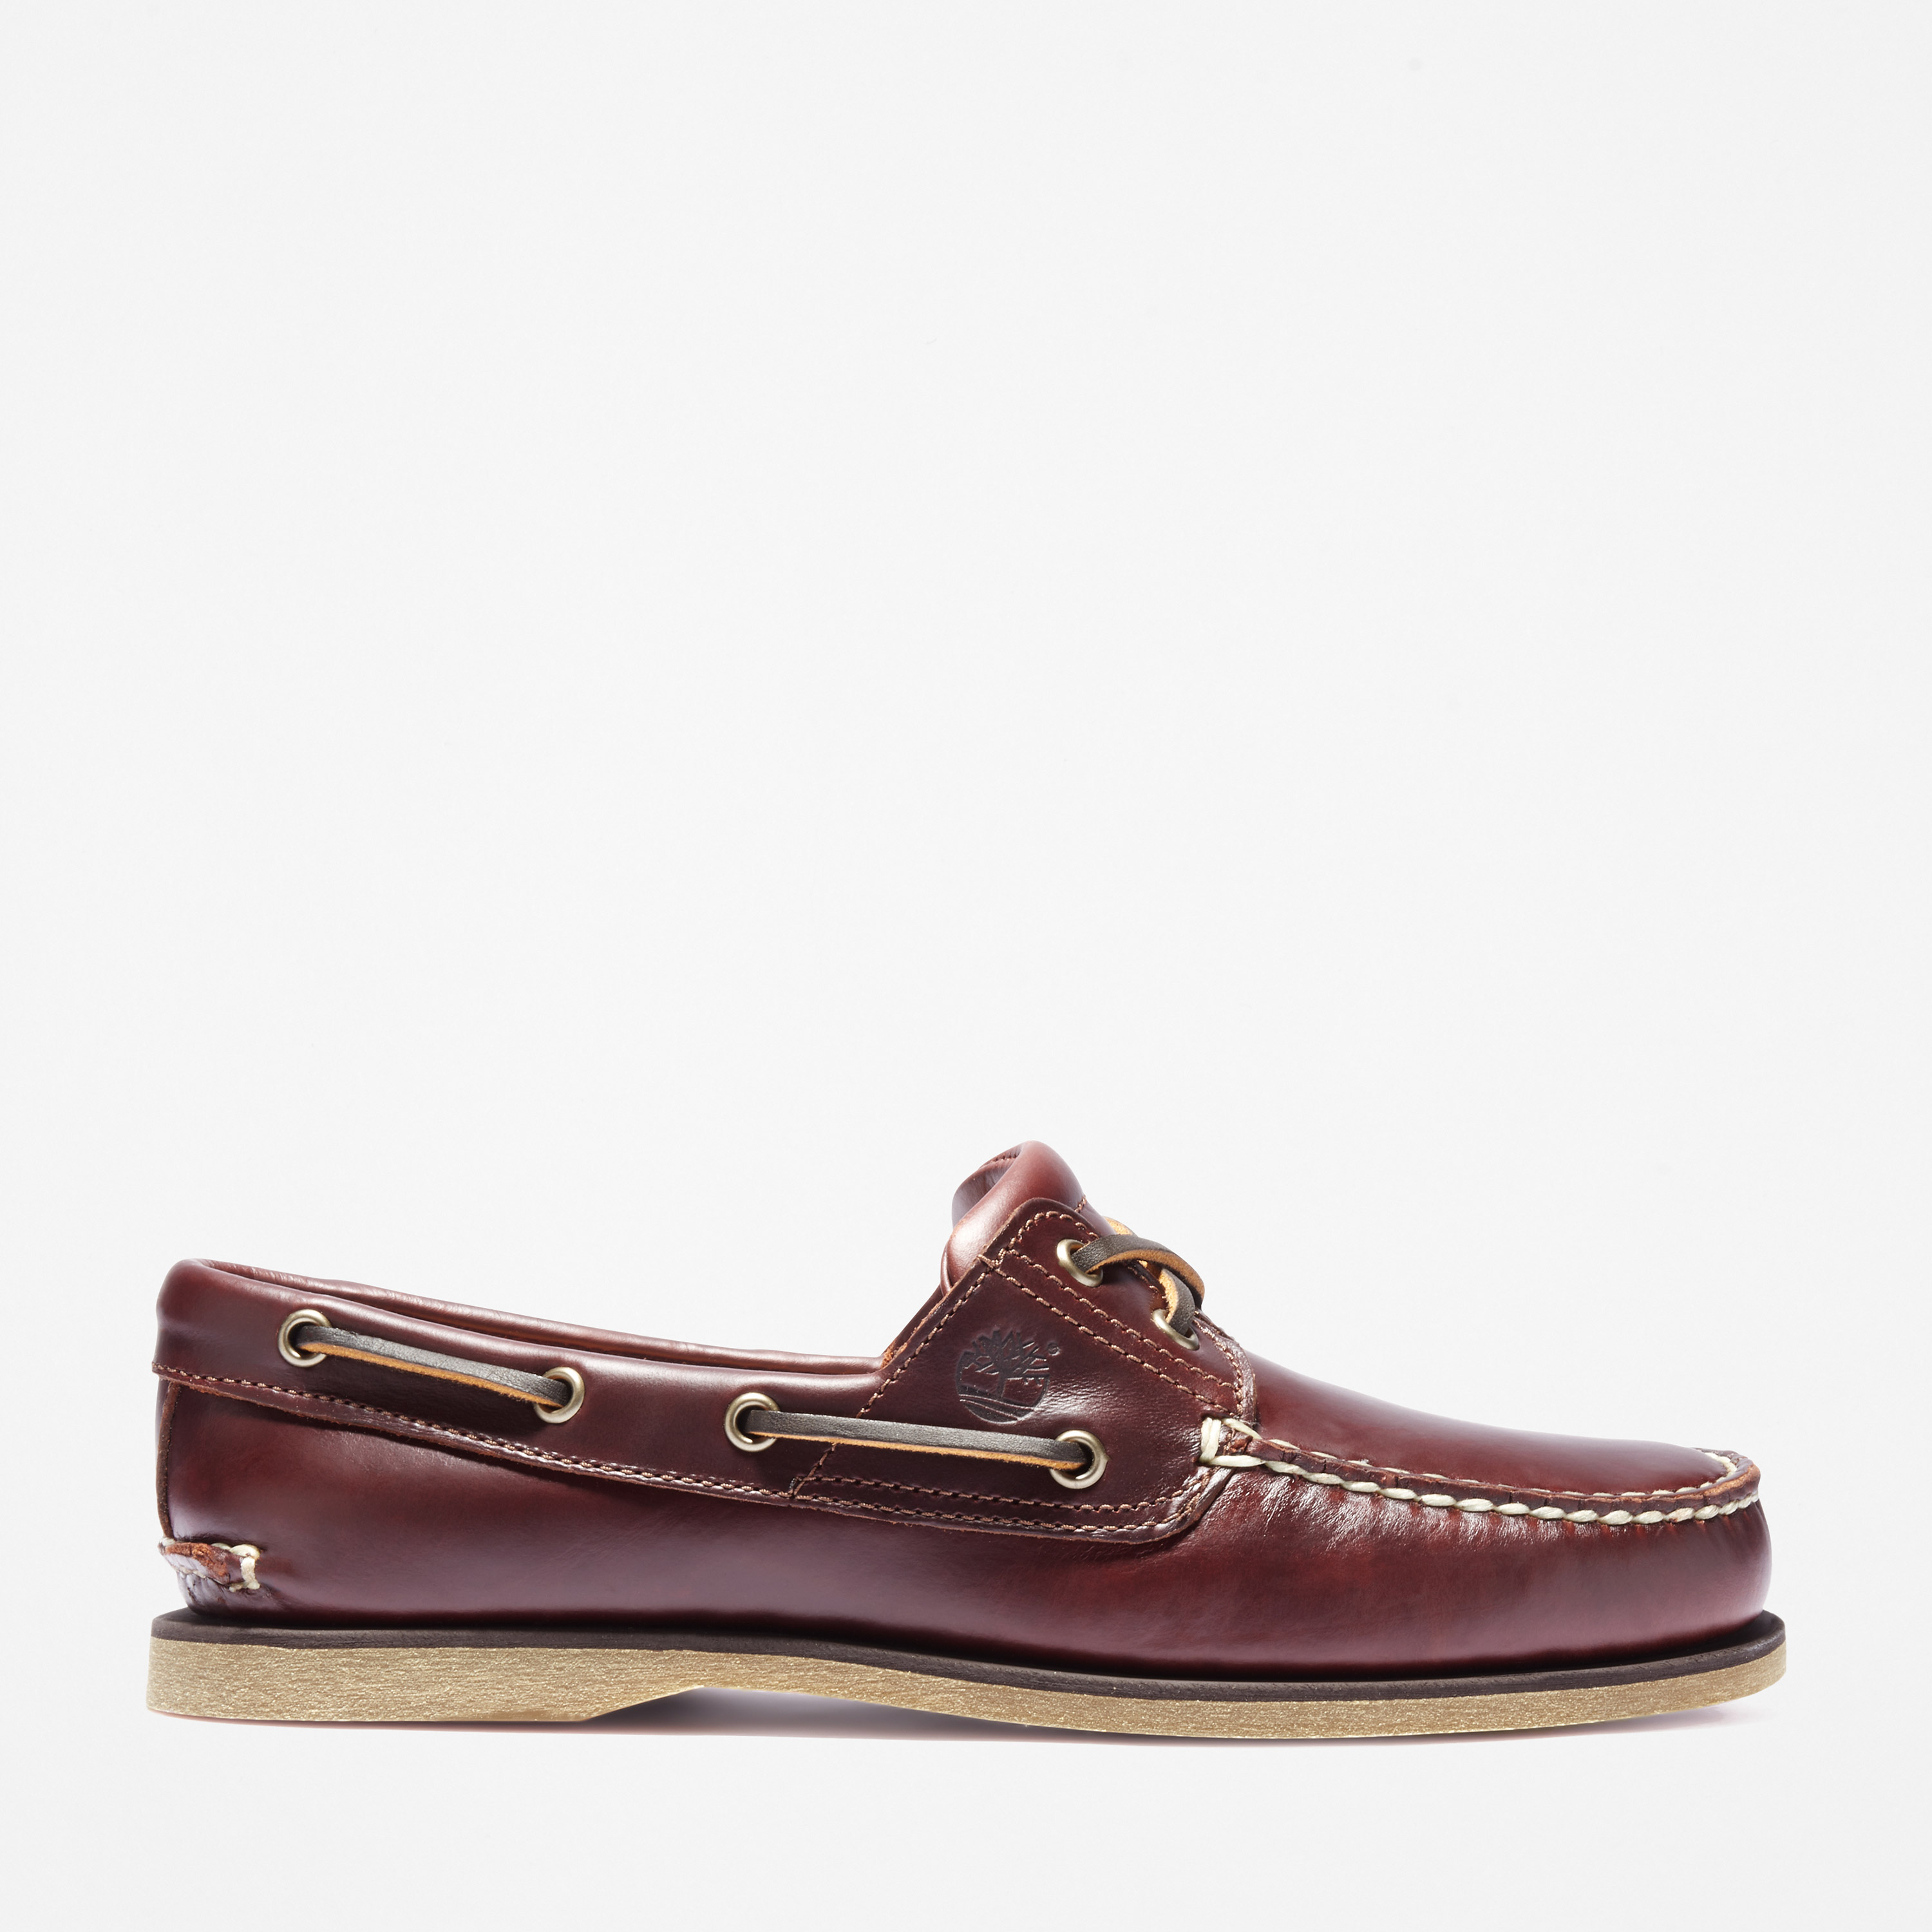 Men's Classic Leather Boat Shoe - Timberland - Singapore